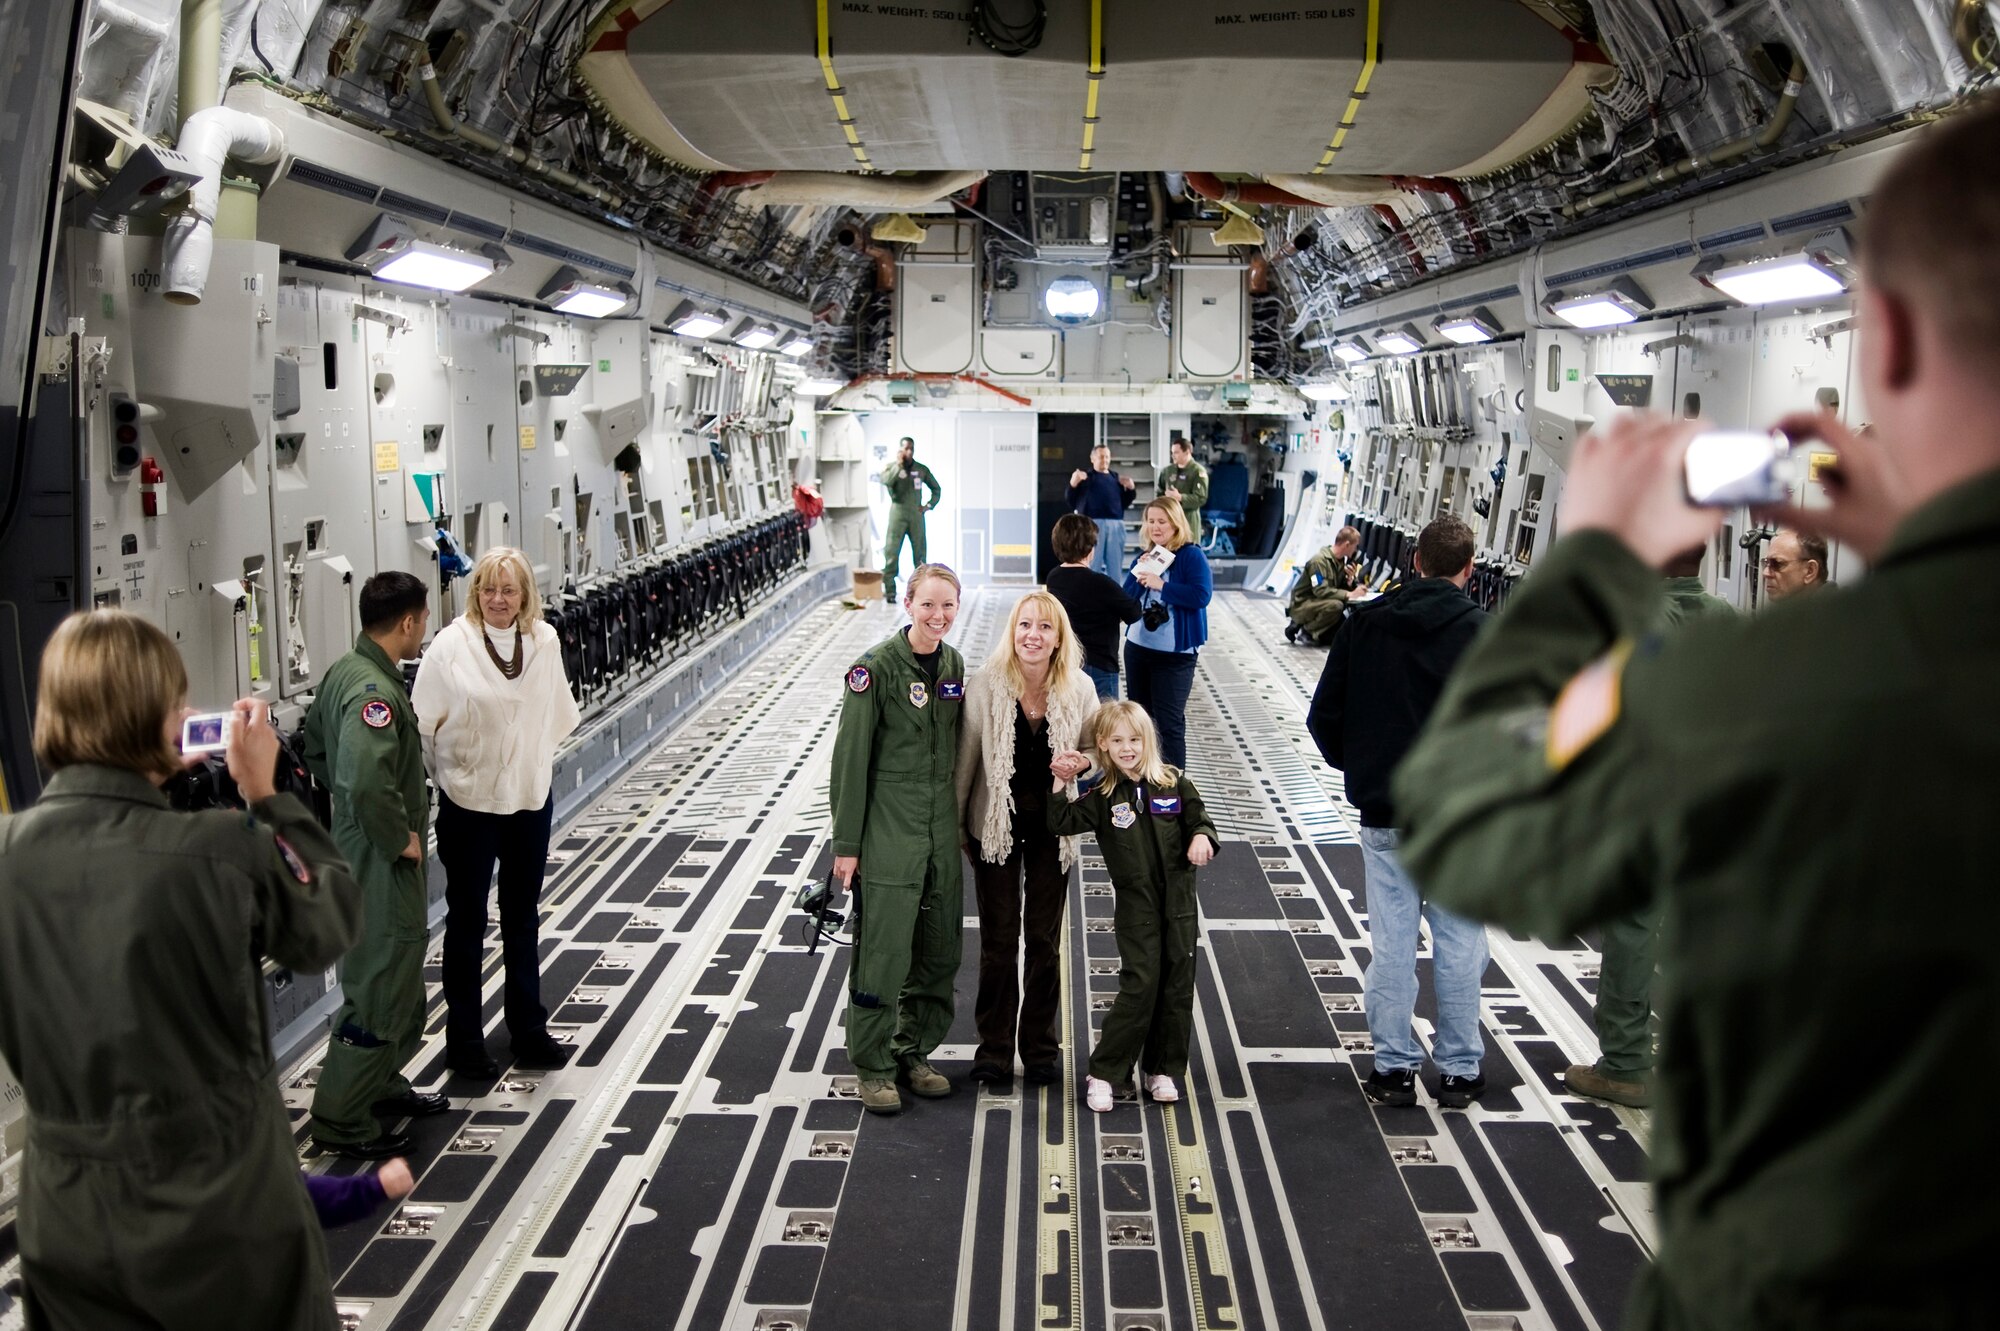 Pilot for a Day candidate Kaylie Bergen, age 6, and her mother Christy pause for a photo with 1st Lt. Eleanor Morgan, 4th Airlift Squadron, while touring a C-17 Globemaster III May 11 as part of McChord Field's Pilot for a Day program. (U.S. Air Force Photo by Abner Guzman)

